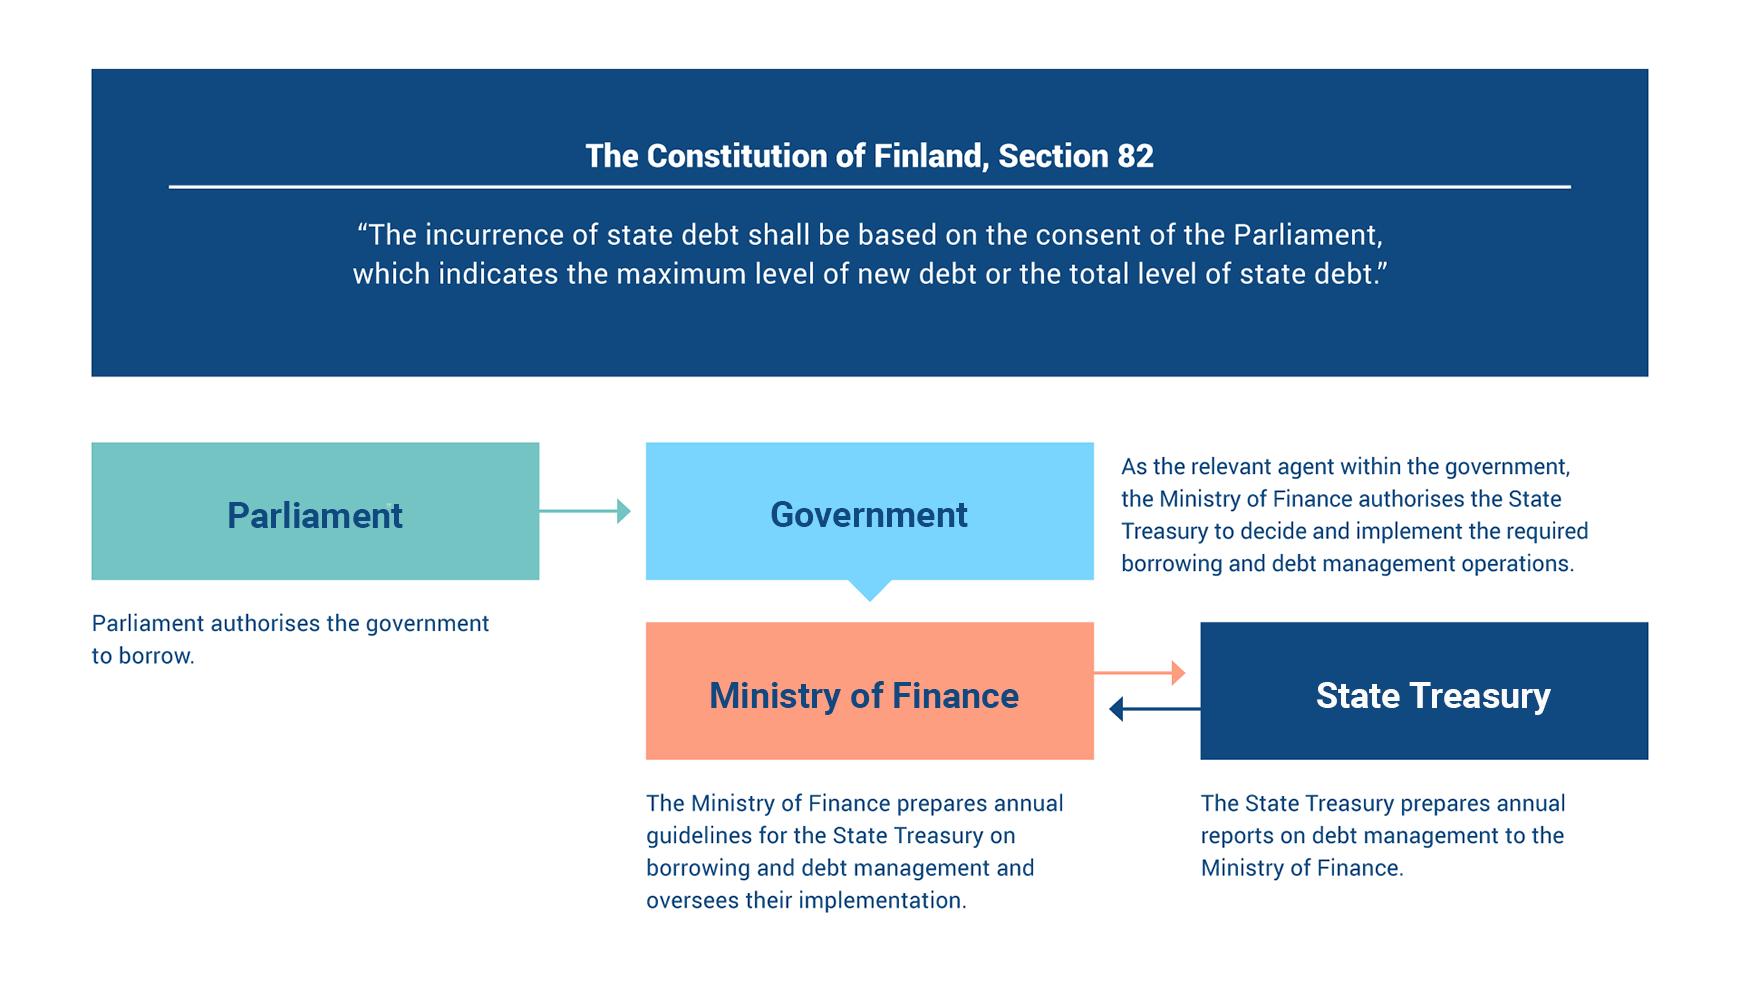 The graph shows the debt management framework in Finland.